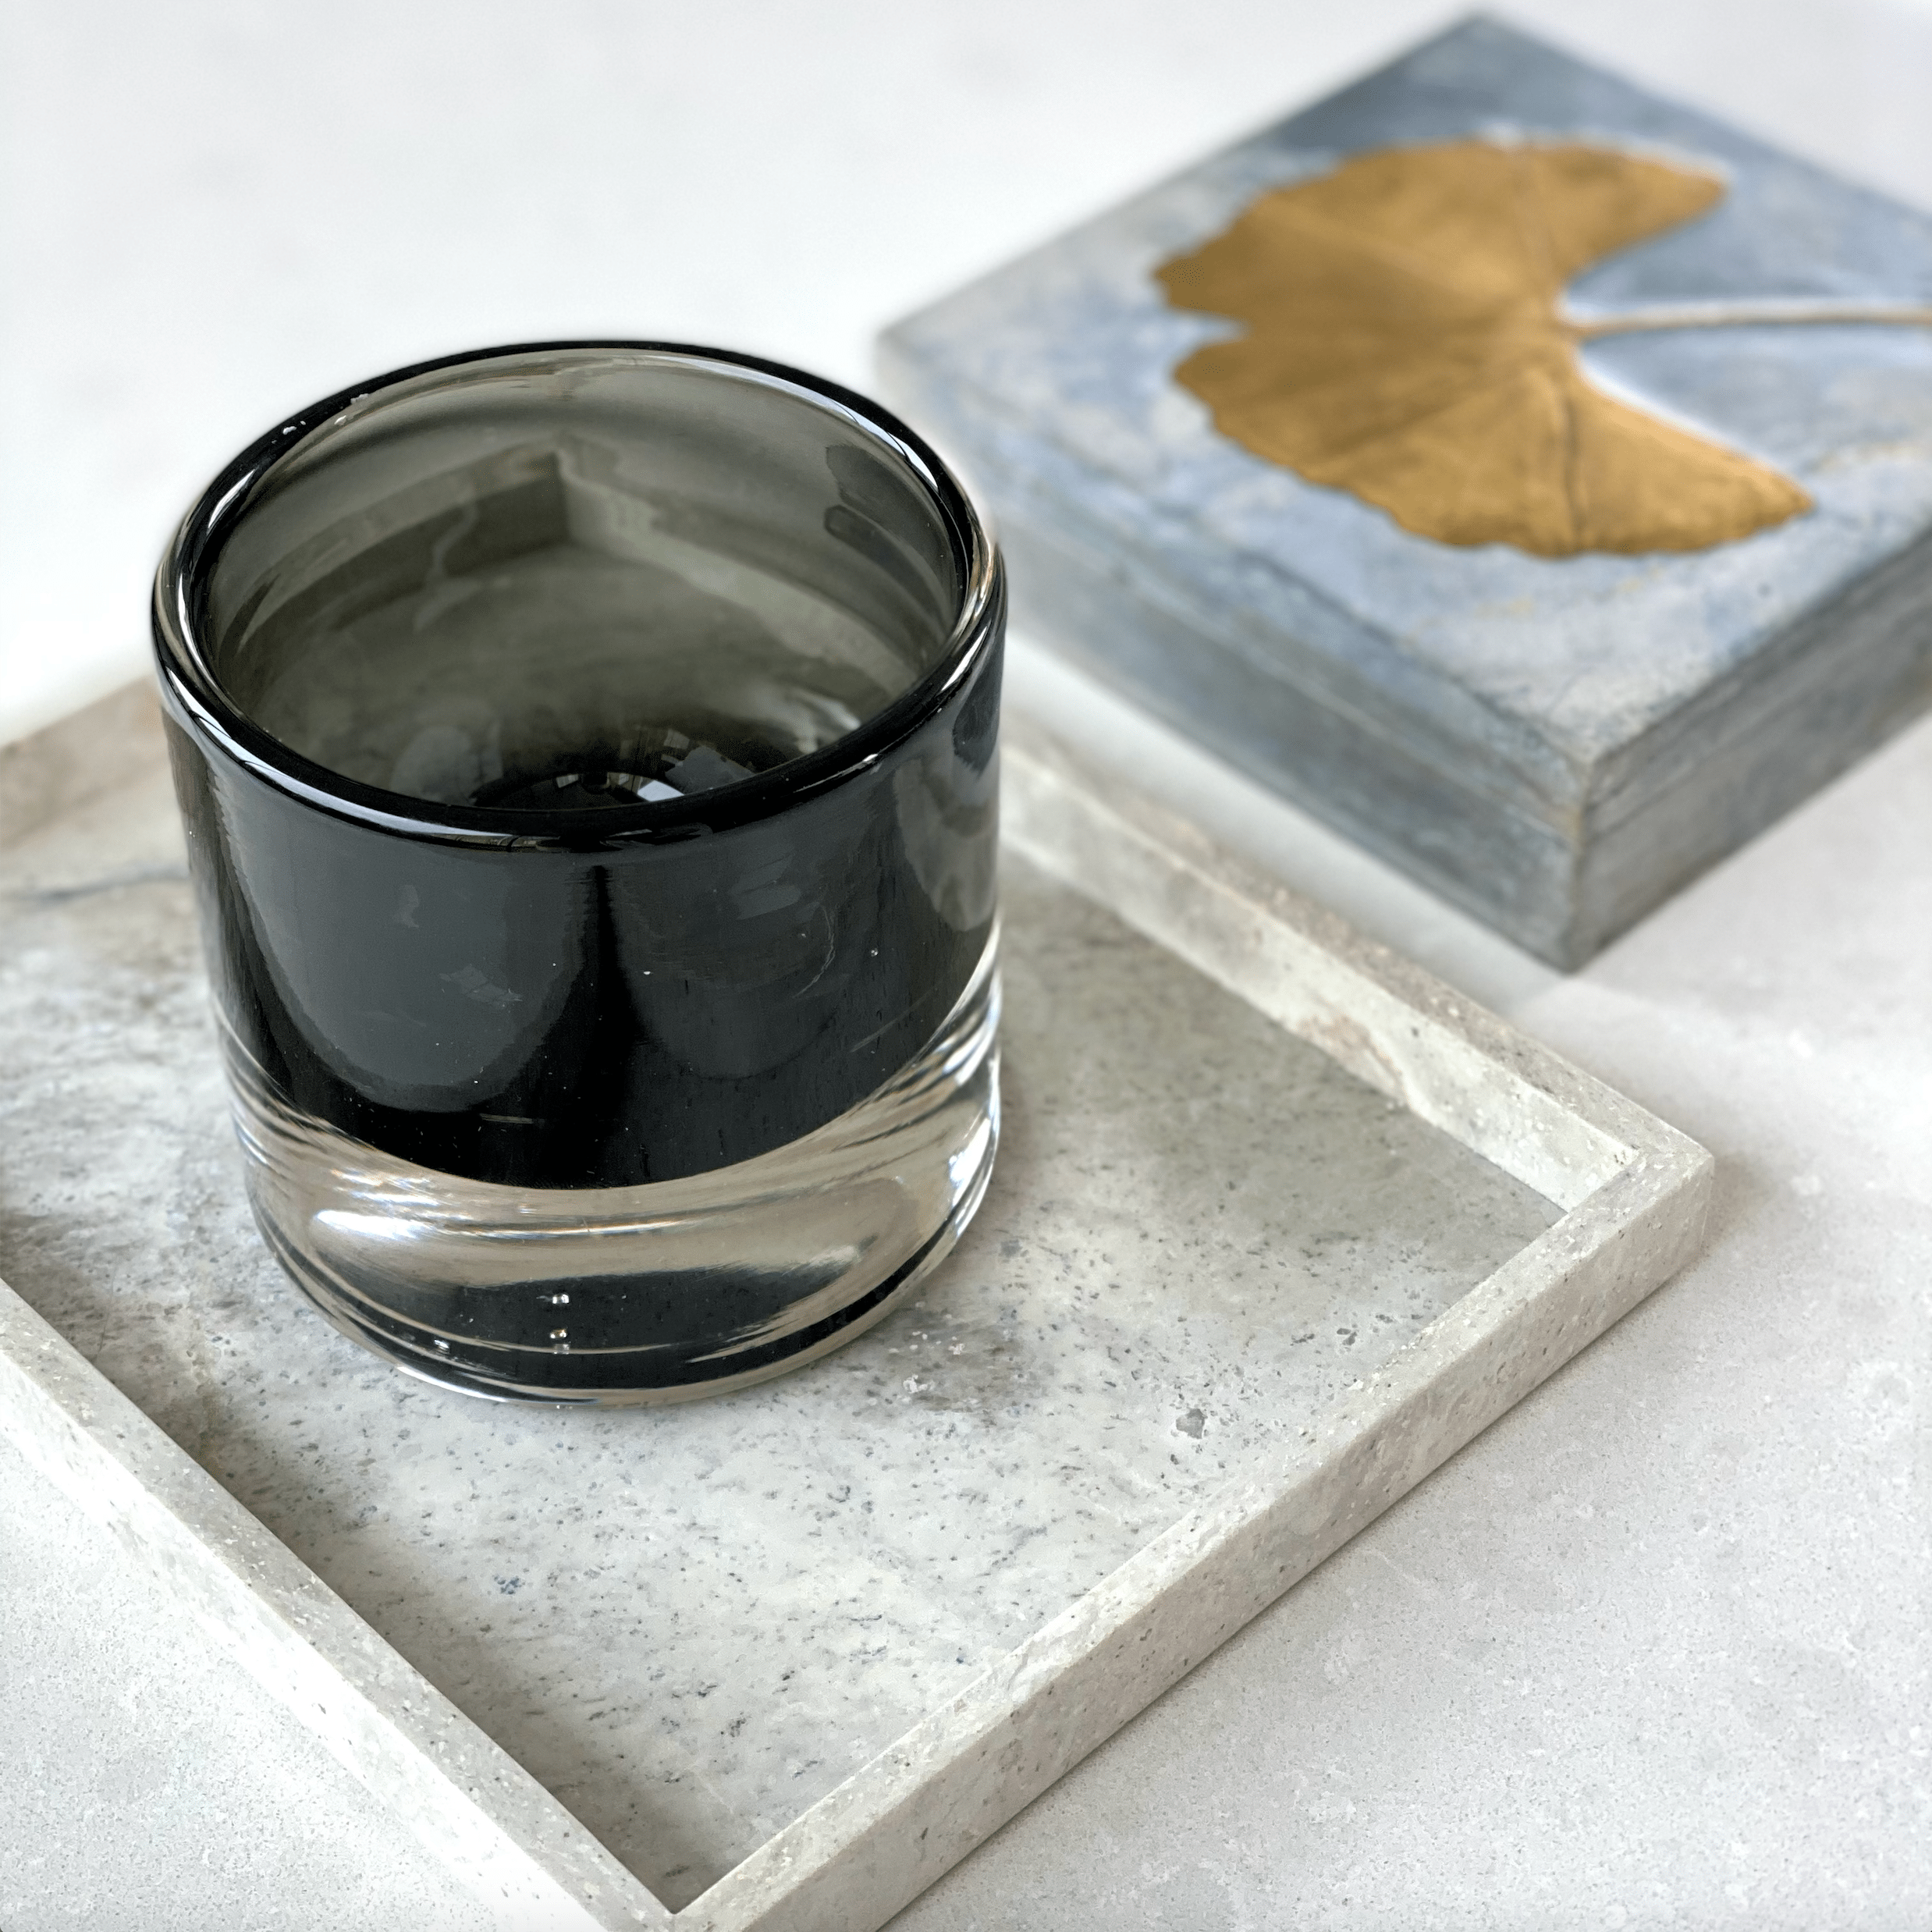 Stylish smoky grey votive, home decor and accessories for your coffee table and living room smoky grey glass